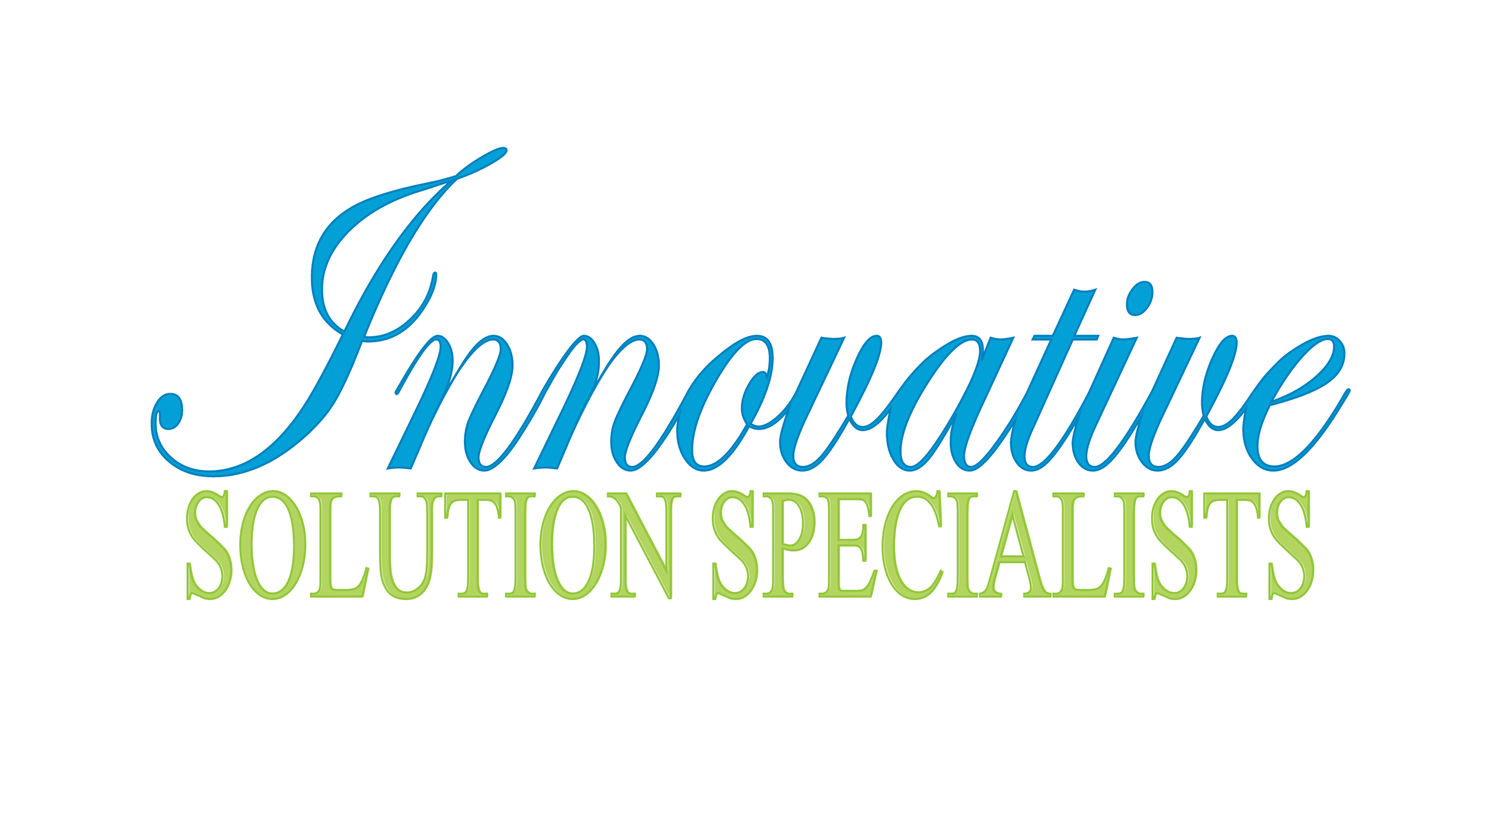 Innovative Solution Specialists